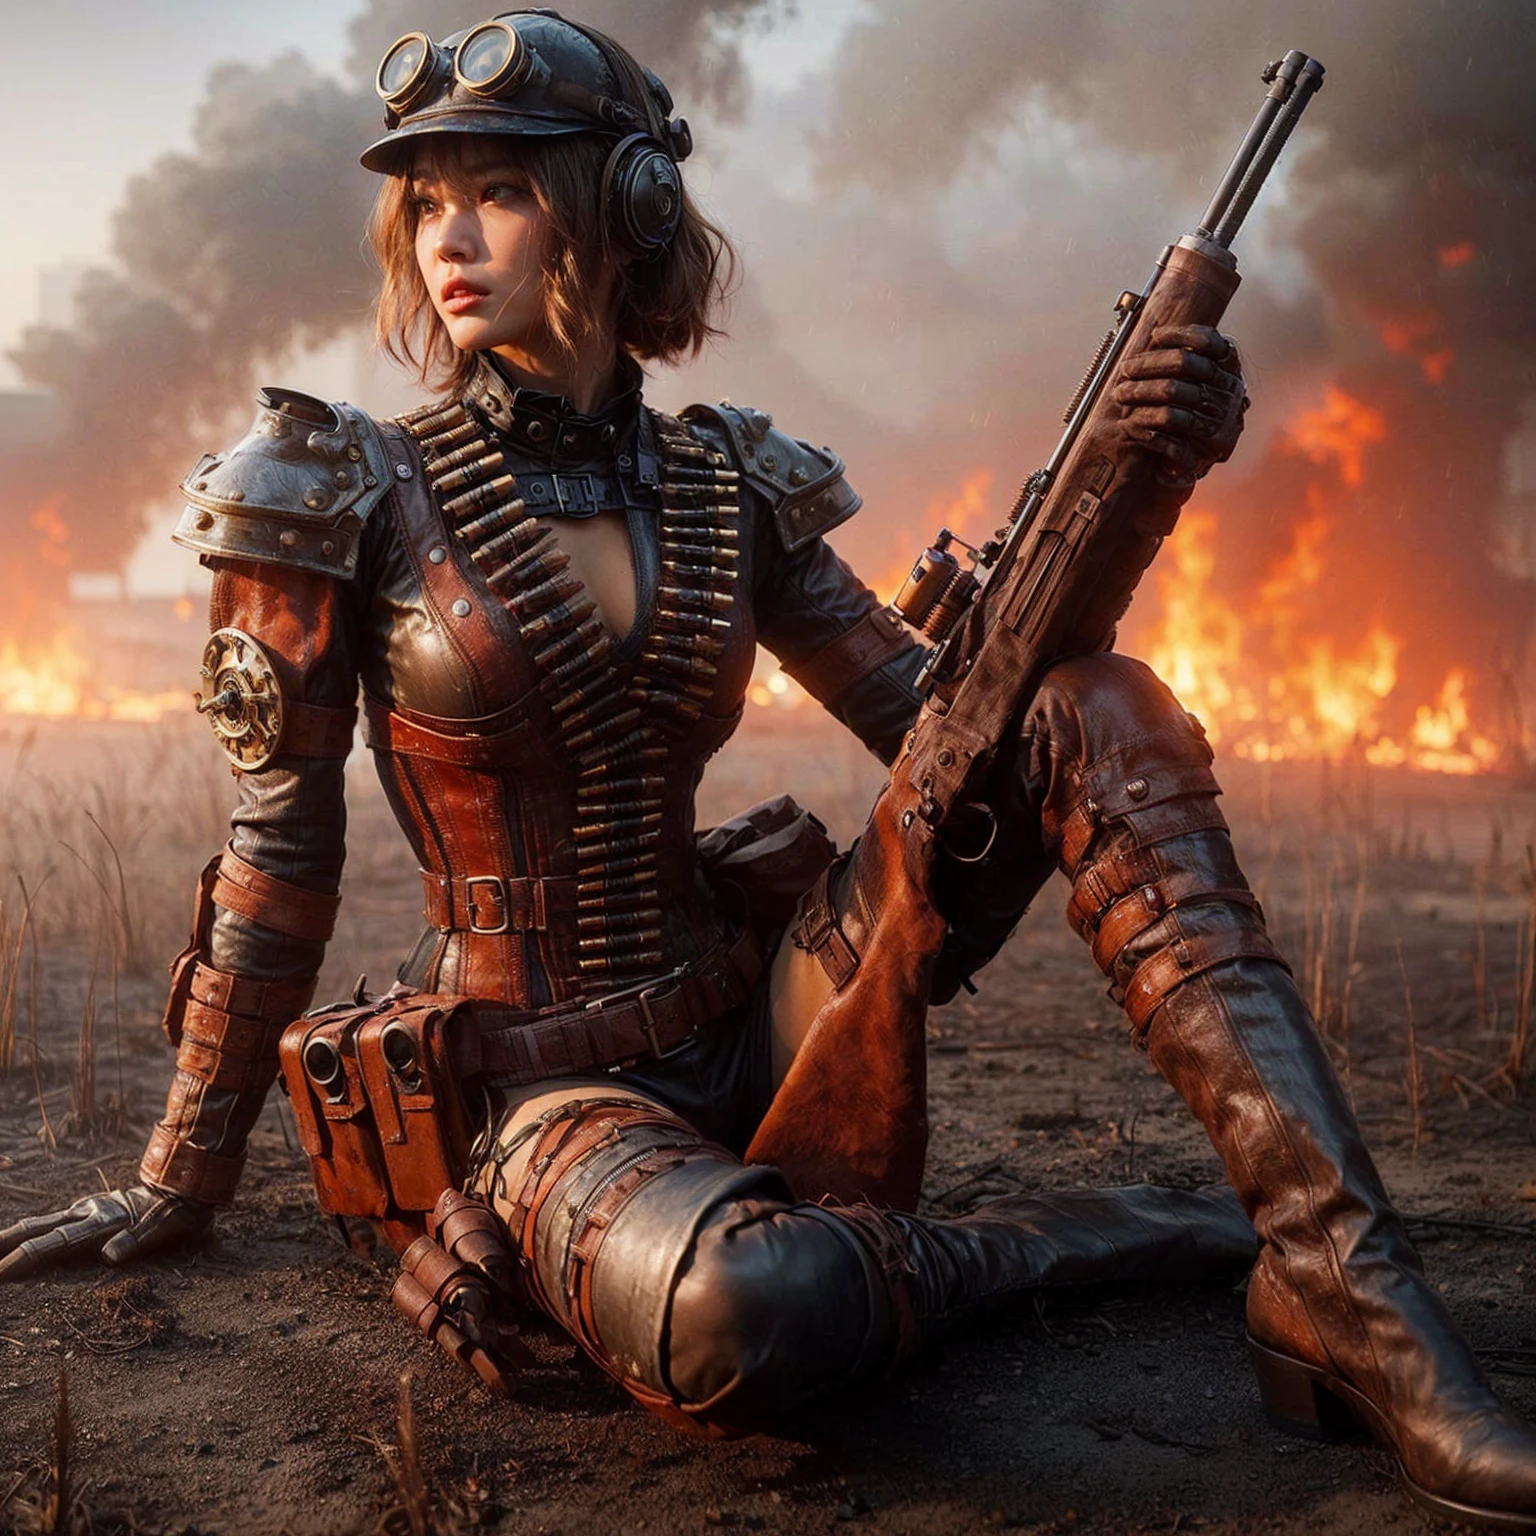 (masterpiece, best quality:1.2), (8k uhd, 16k, 32k, ultra high res), realistic photo, ultra sharp photo result, HDR10, superrealism, (The main subject: Wide-angle lens), (steampunk:1.2), beautiful female, (super beautiful face), legs, Power mechanical suit), (super intricate all details), (super realistic all textures), metallic yellow color, hydraulic cylinder, Rust, scars from previous battles, (steam engine like),cinematic poses in motion, Rain, humidity, jungle